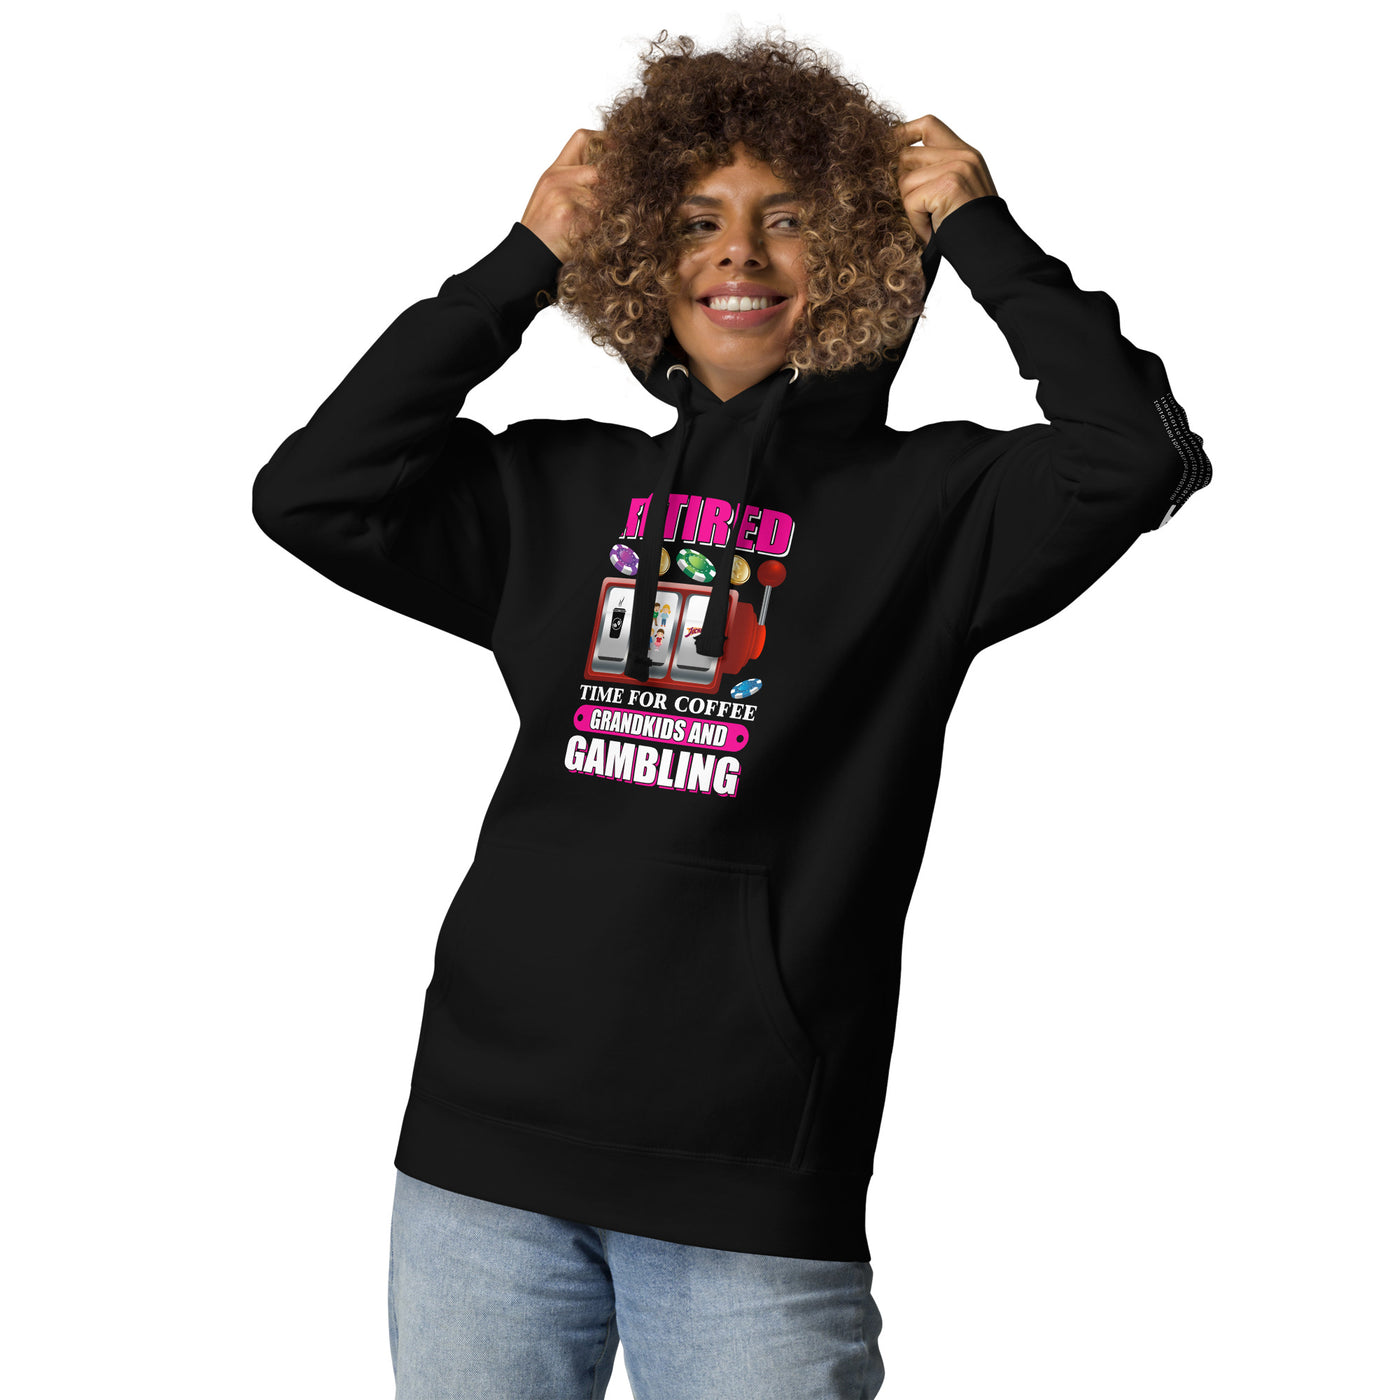 Retired: Time for Coffee, Grandkids and Gambling - Unisex Hoodie